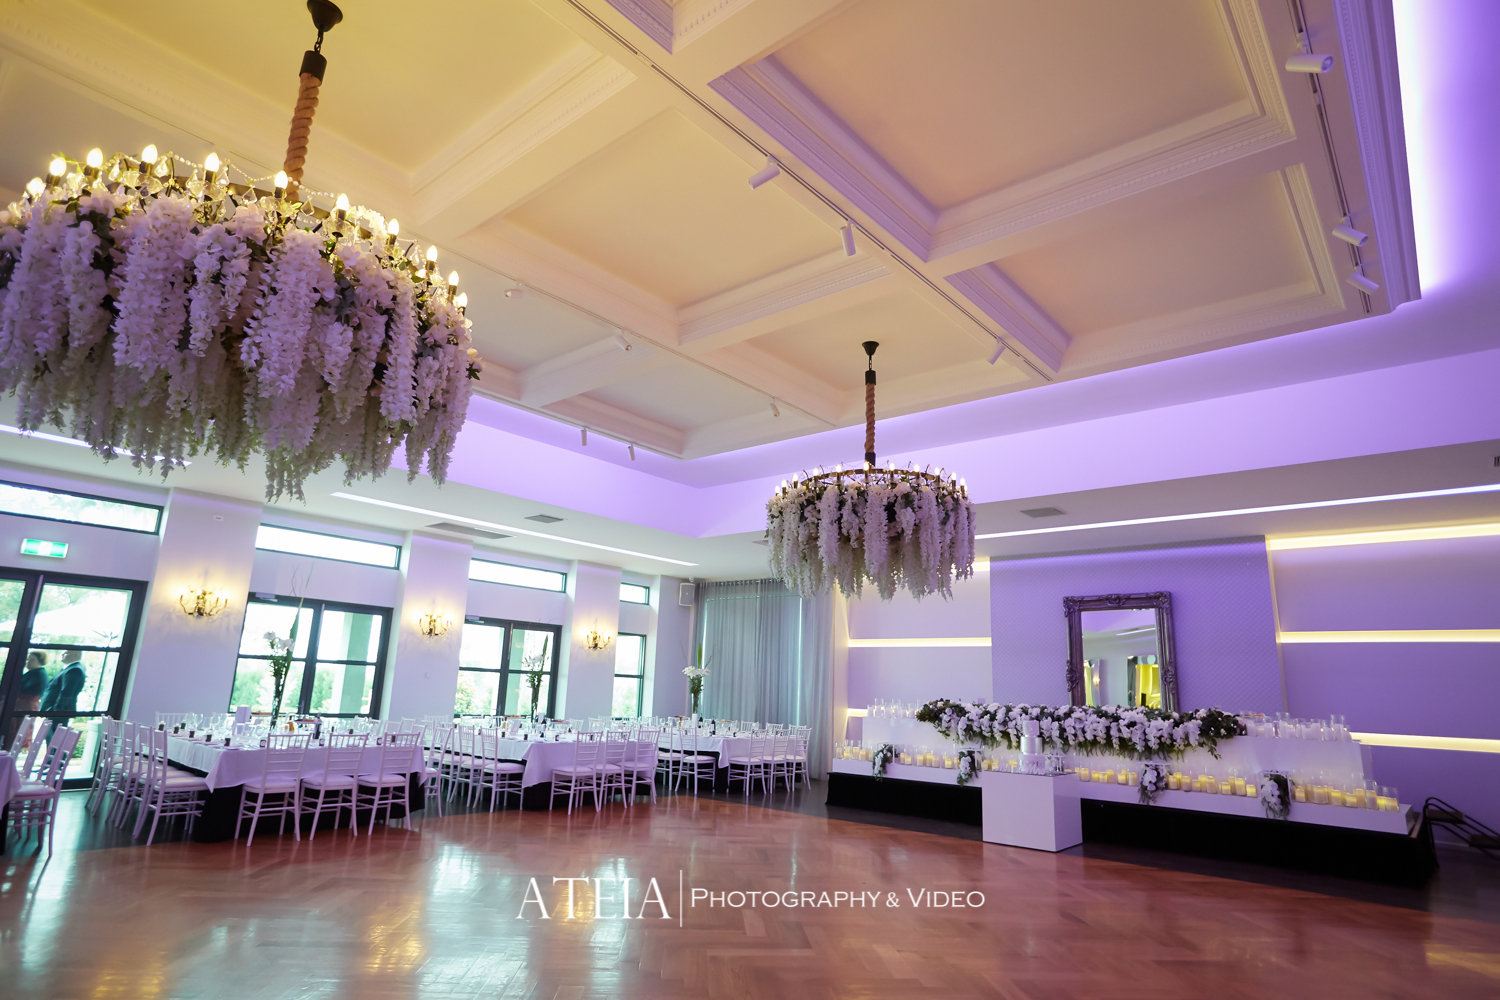 , Meadowbank Receptions Wedding Photography by ATEIA Photography &#038; Video